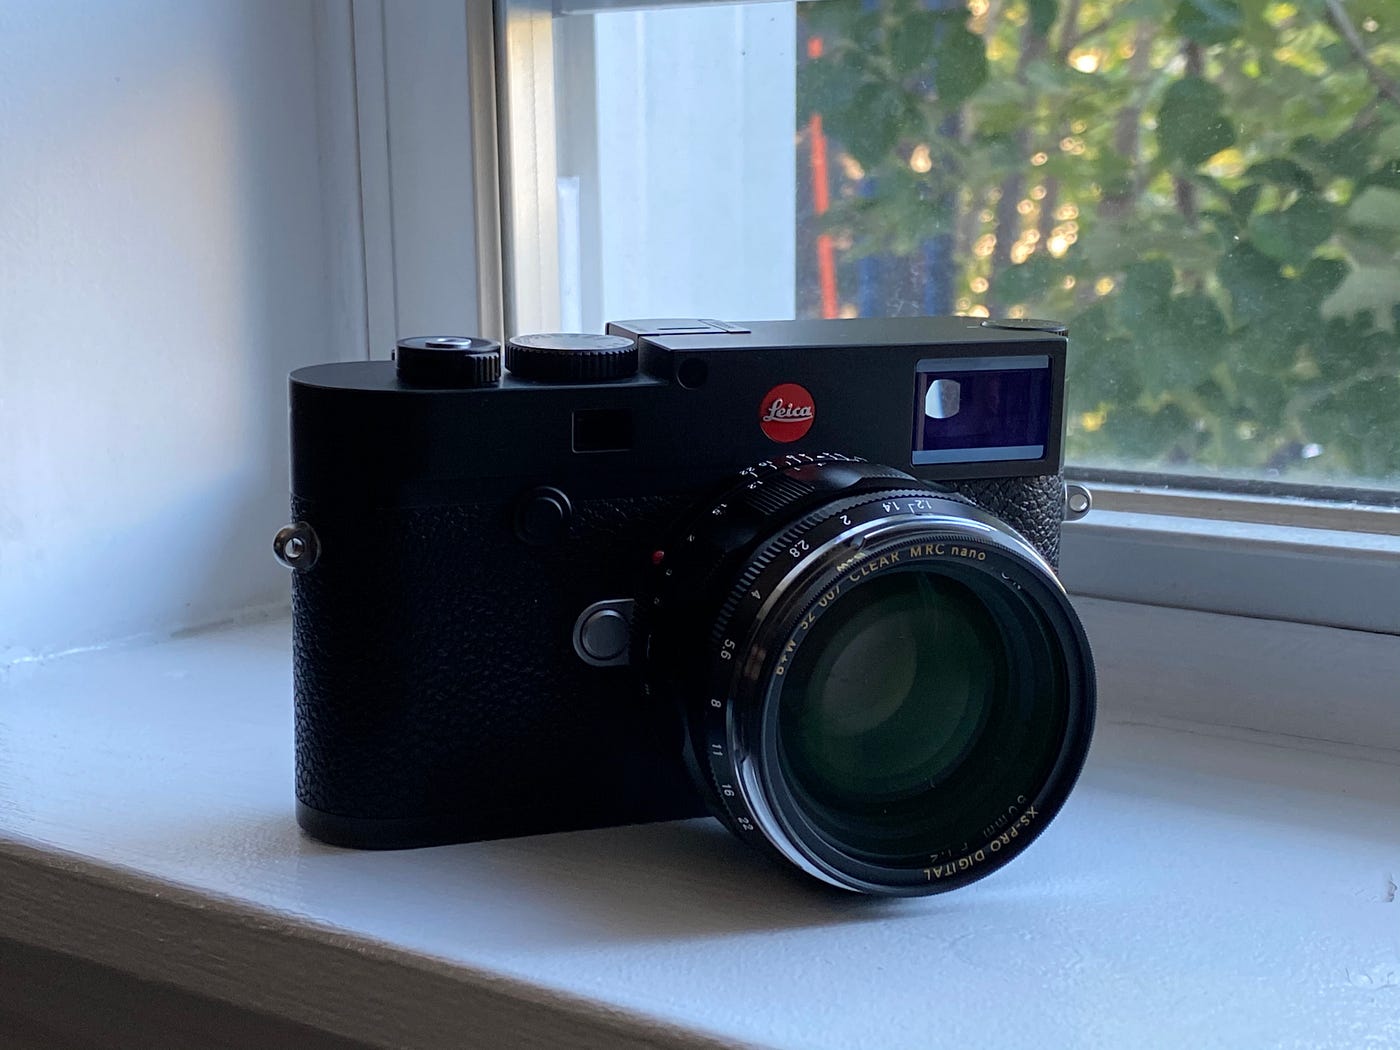 My Summer with the Leica M10: From a Fuji and Sony User